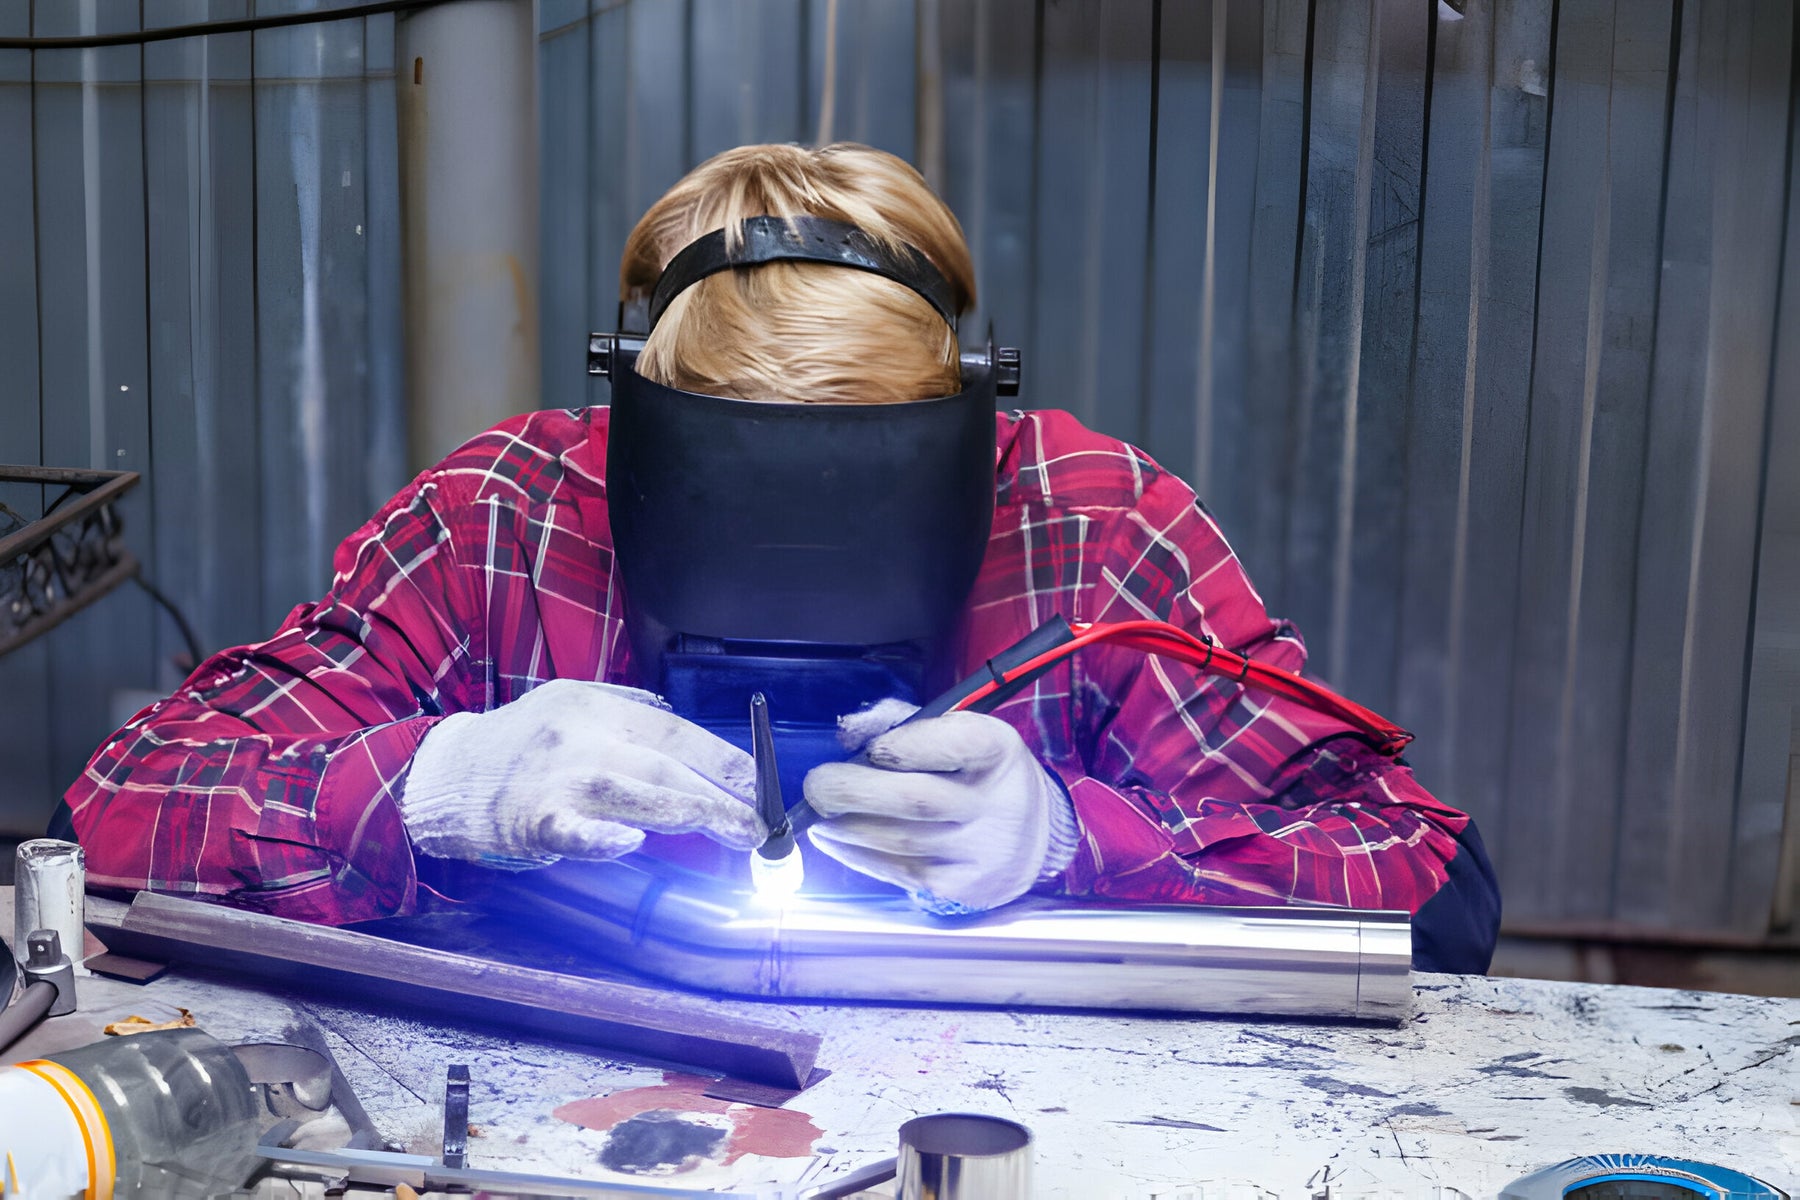 Exploring Artistic Welding Projects for Hobbyists